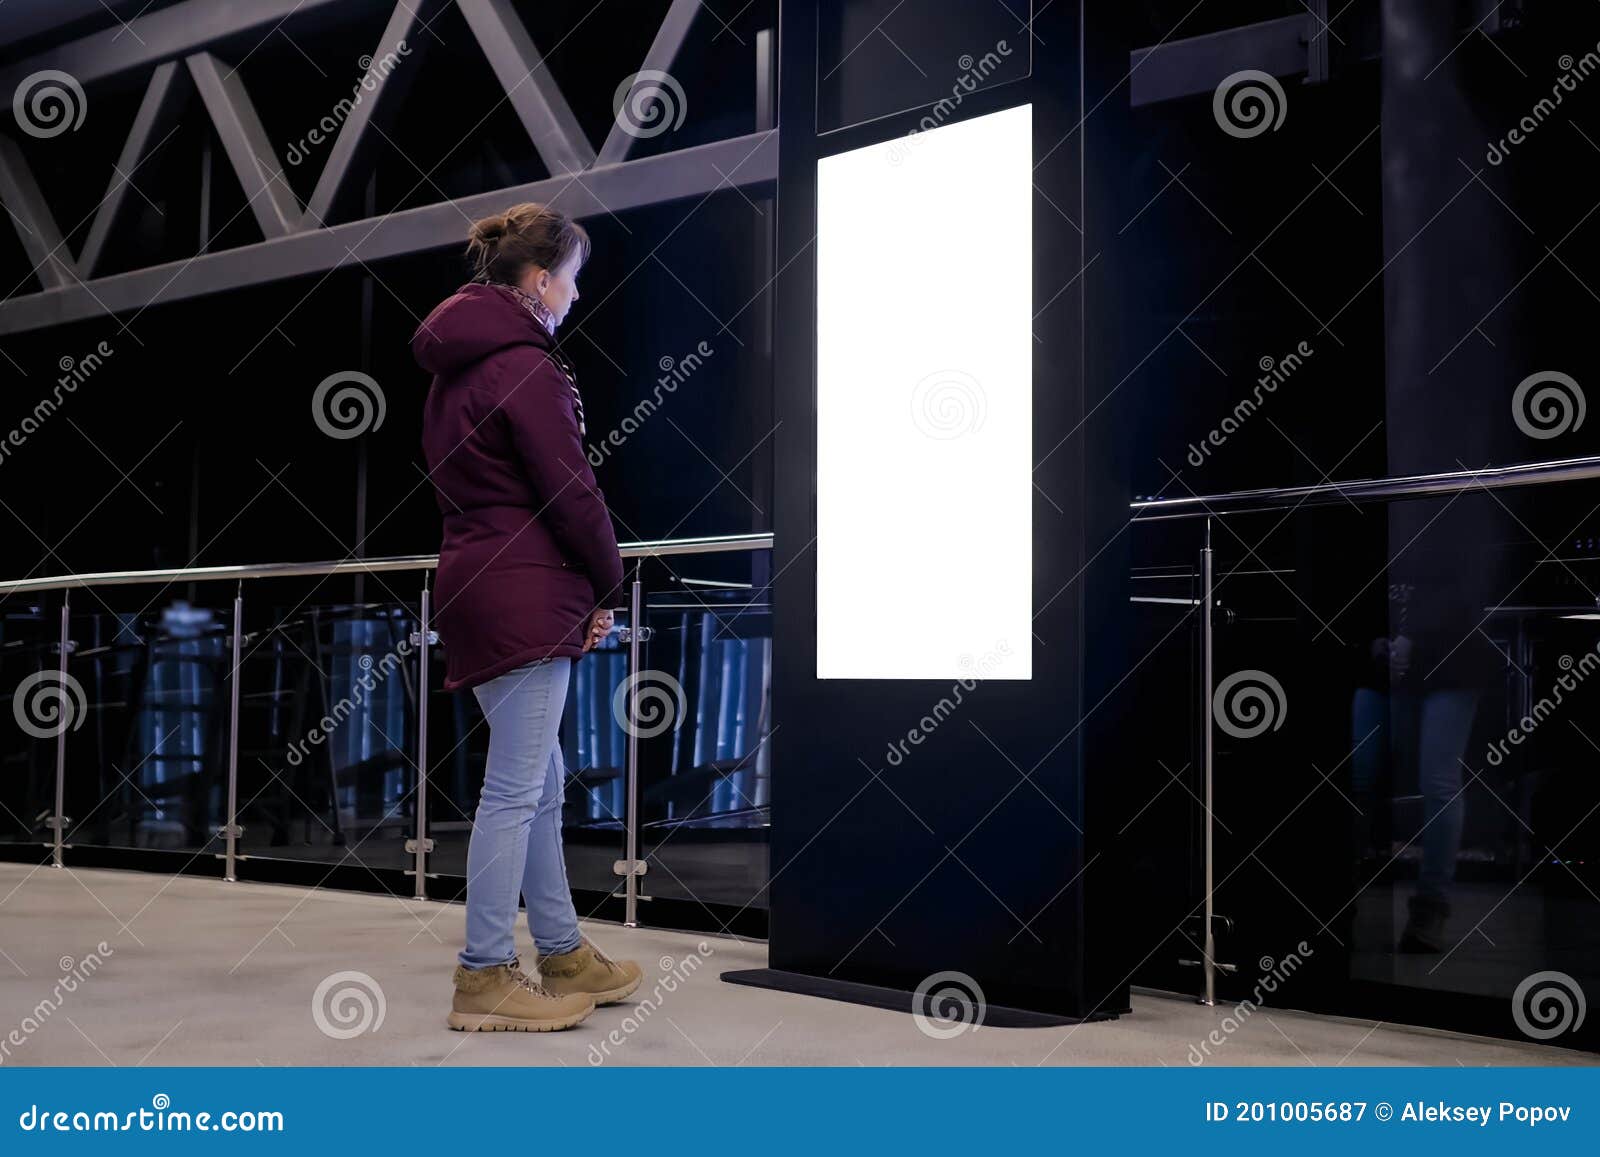 white screen concept - woman looking at blank interactive white display kiosk